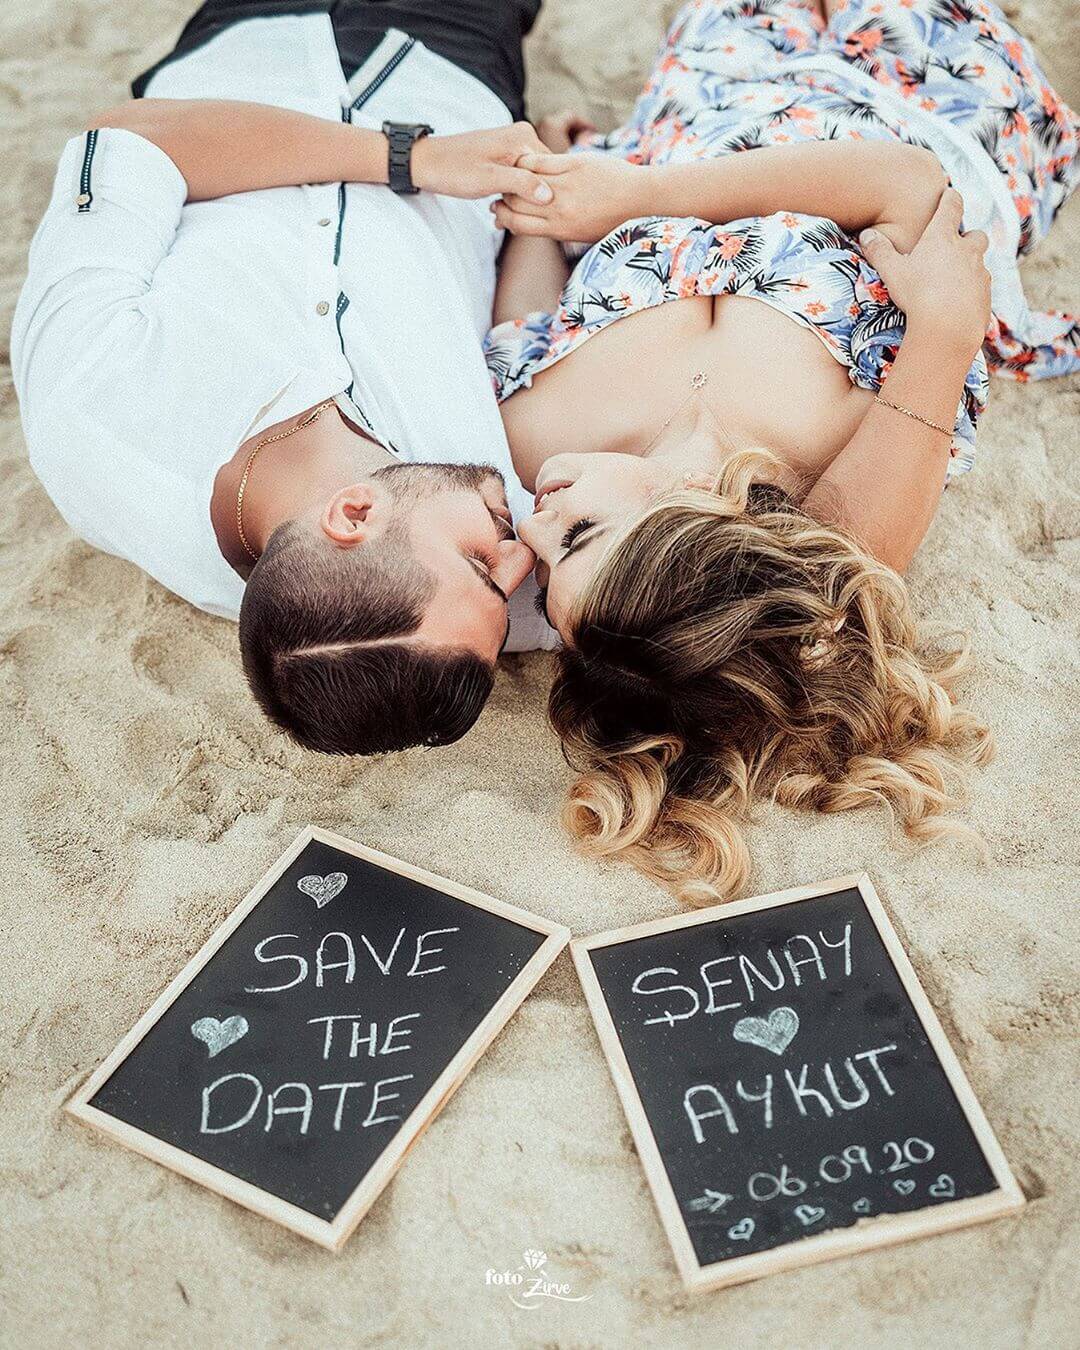 save the date ideas